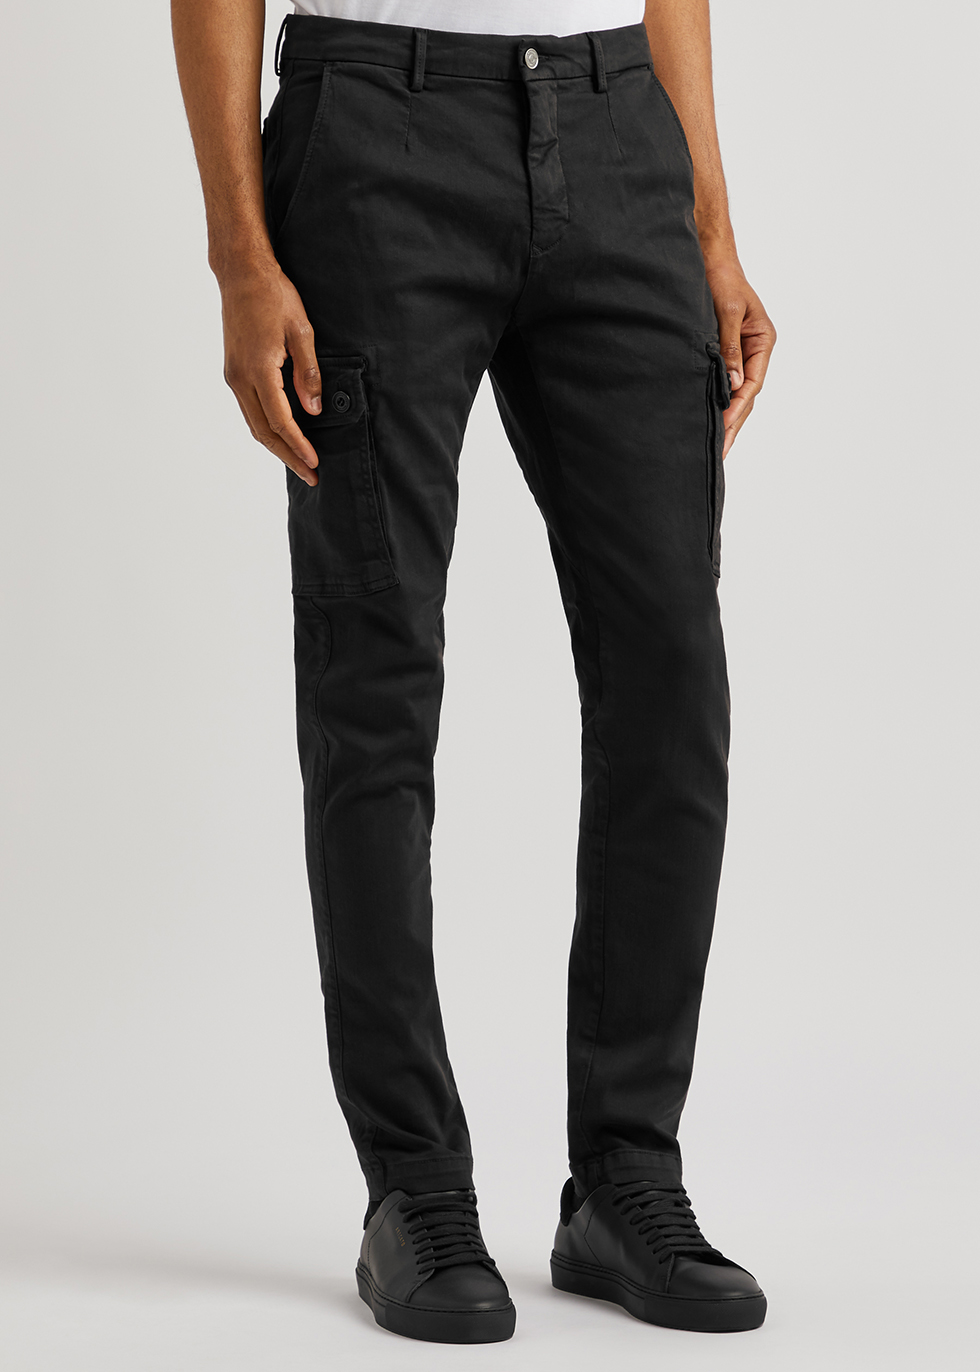 Buy GUESS Black Slim Tapered Fit Cargo Trousers  Trousers for Men 783509   Myntra